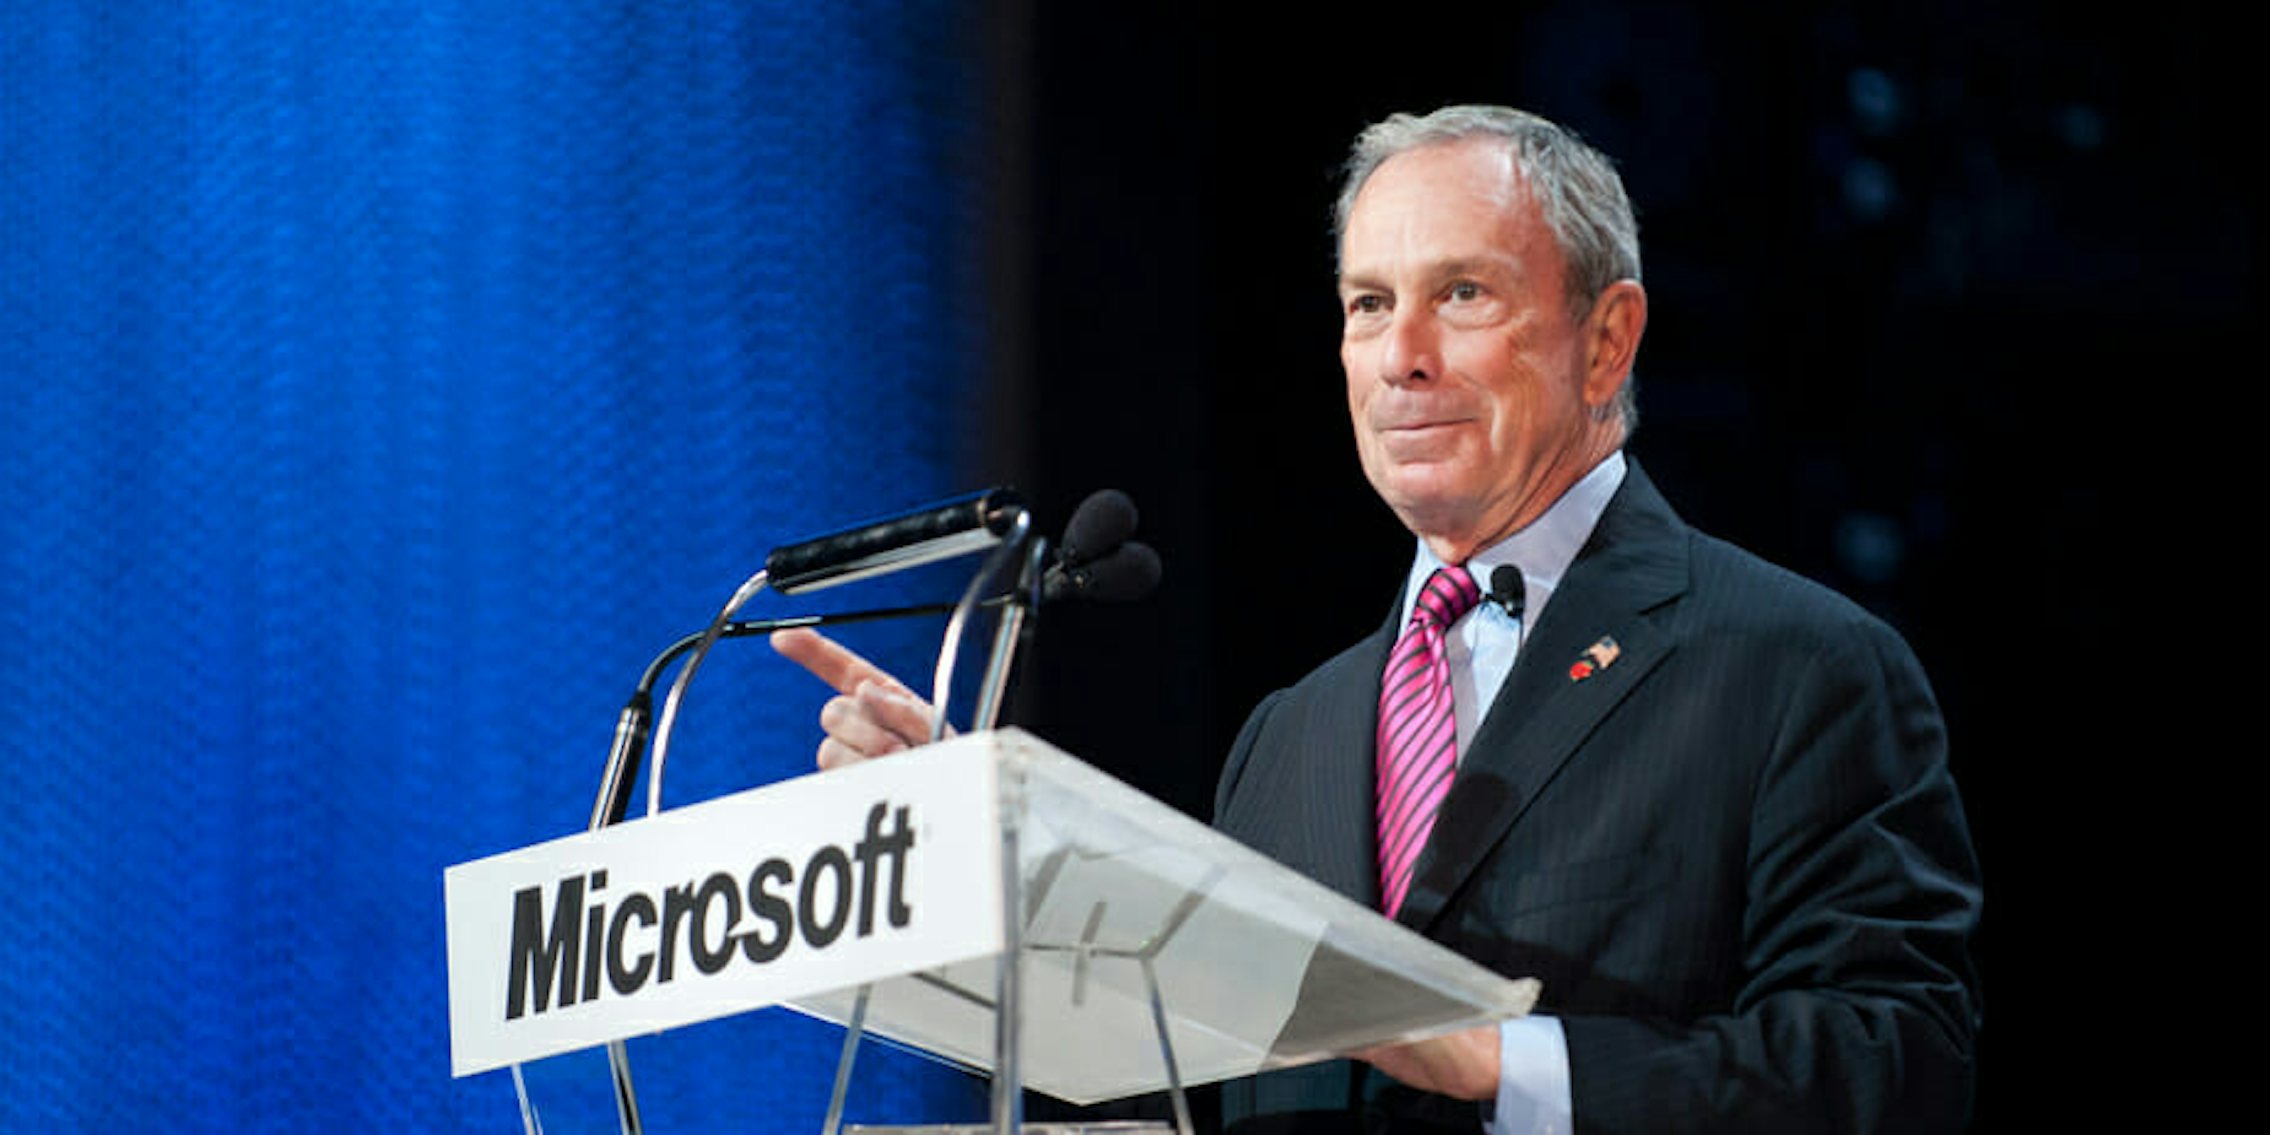 Michael Bloomberg announced that he has registered as a Democrat, sparking speculation about a possible 2020 run.